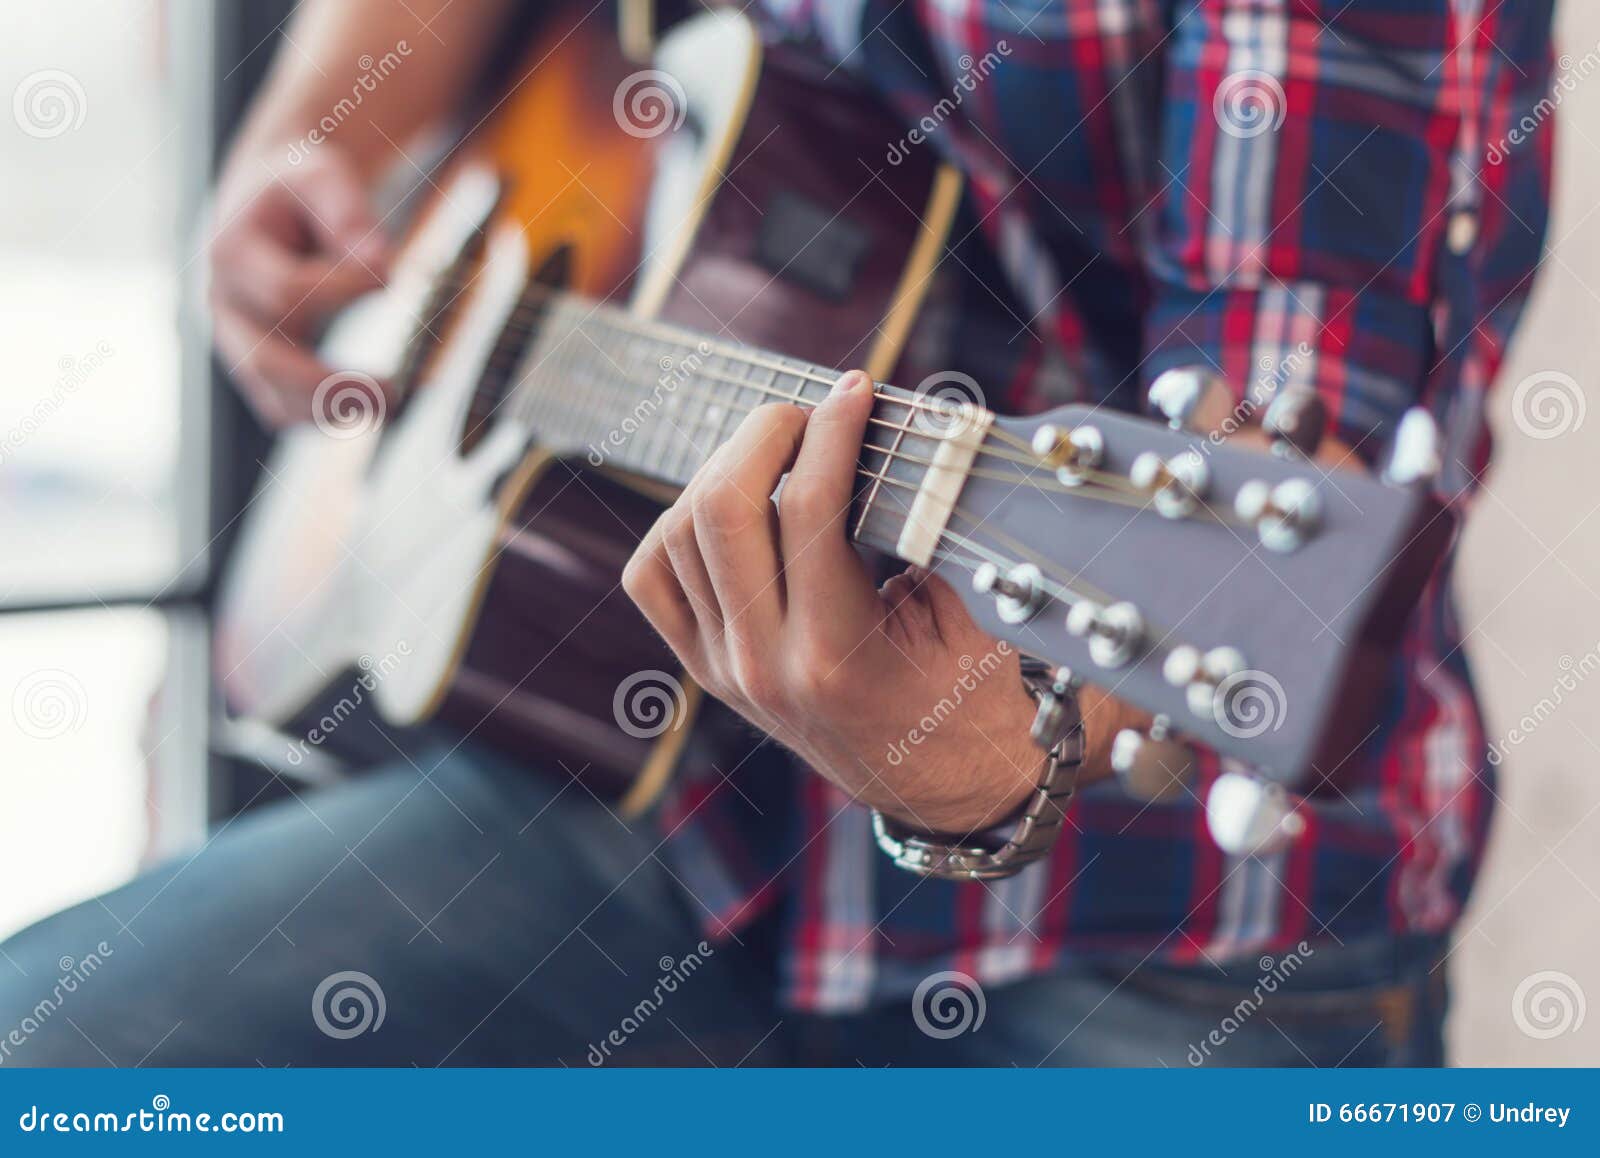 accord chord, close up of mens hands playing an acoustic guitar